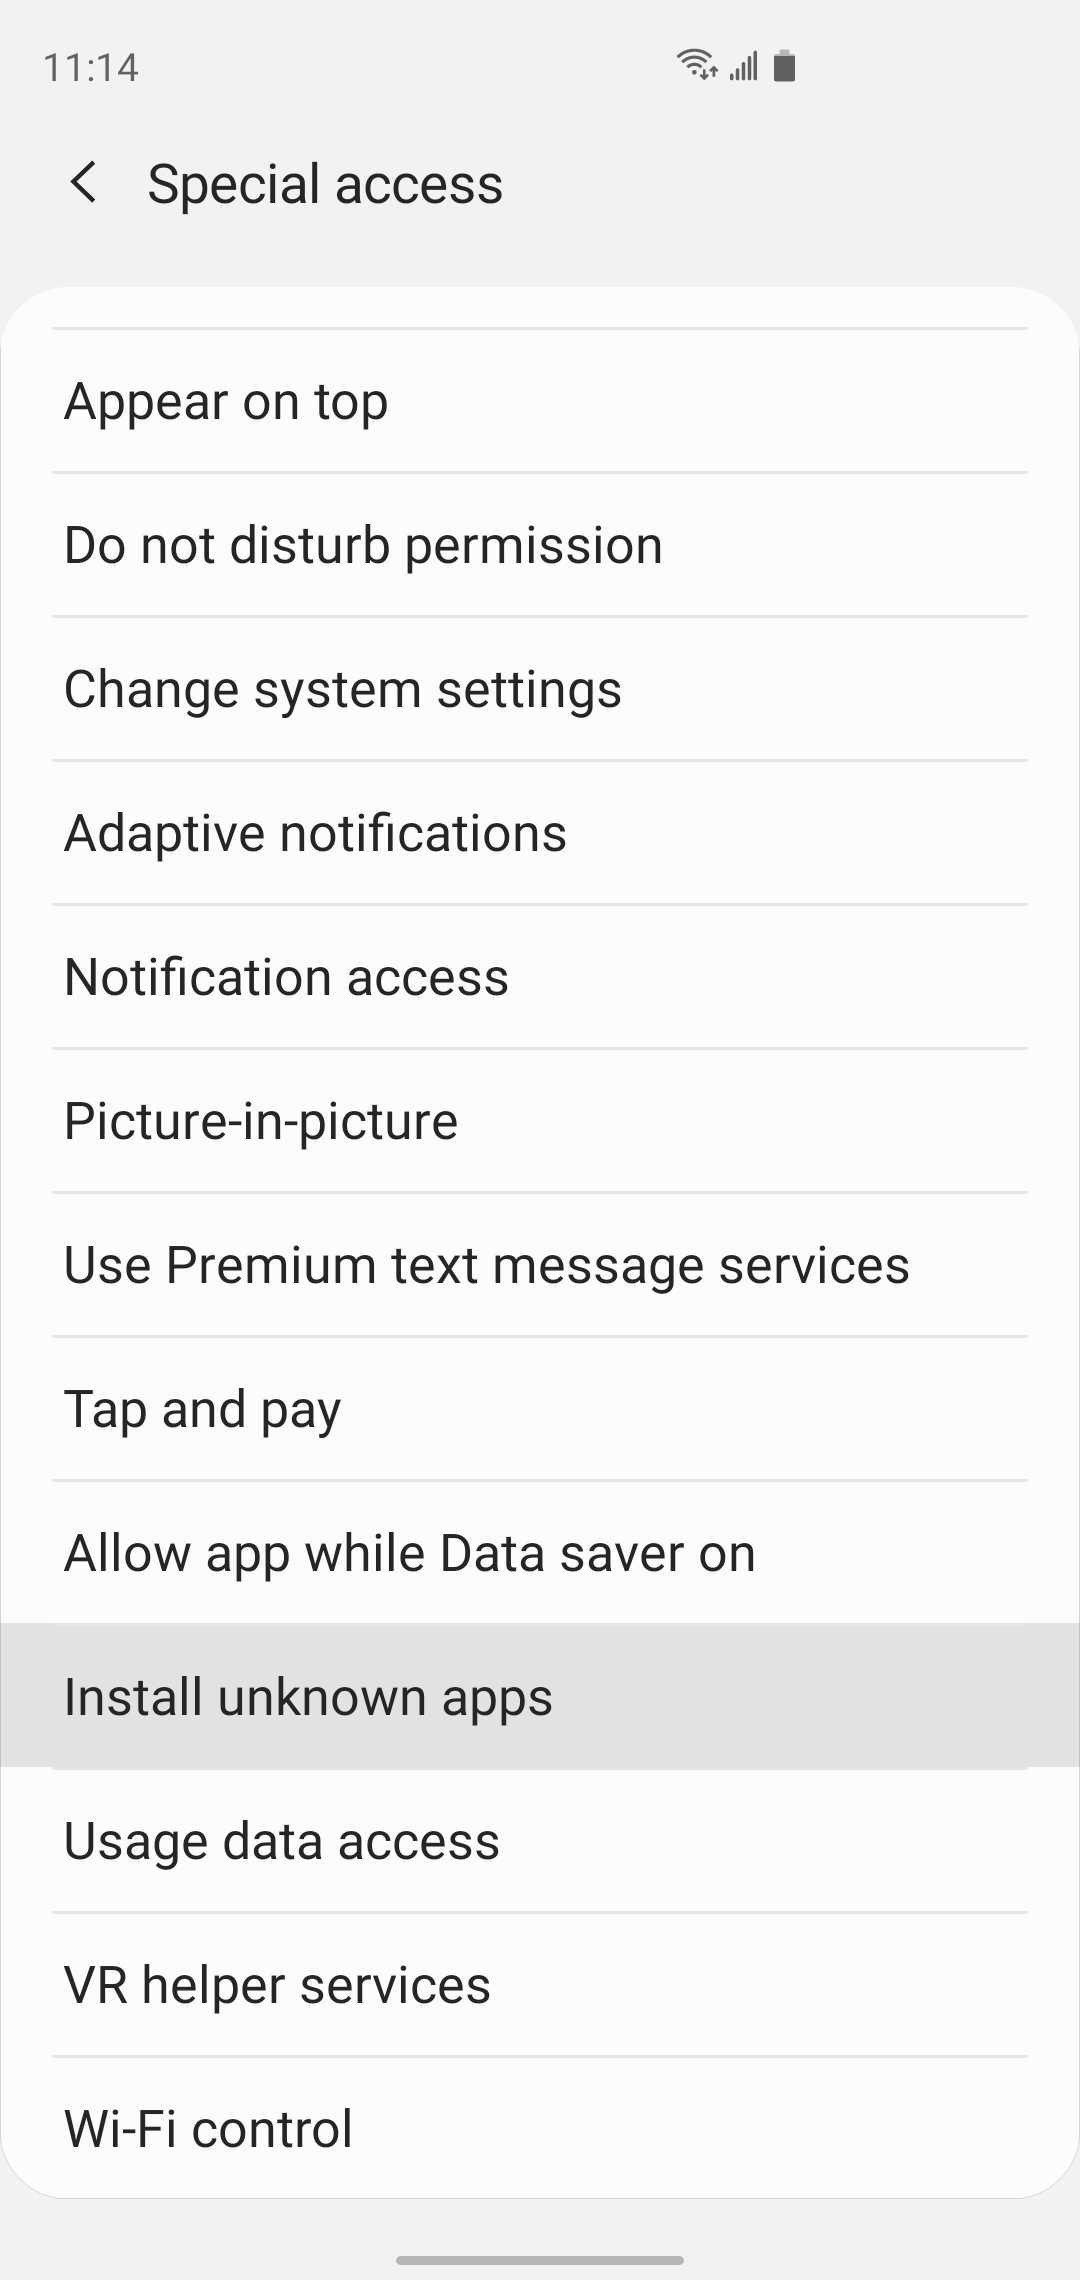 Everything You Need to Disable on Your Galaxy S10 for Privacy & Security